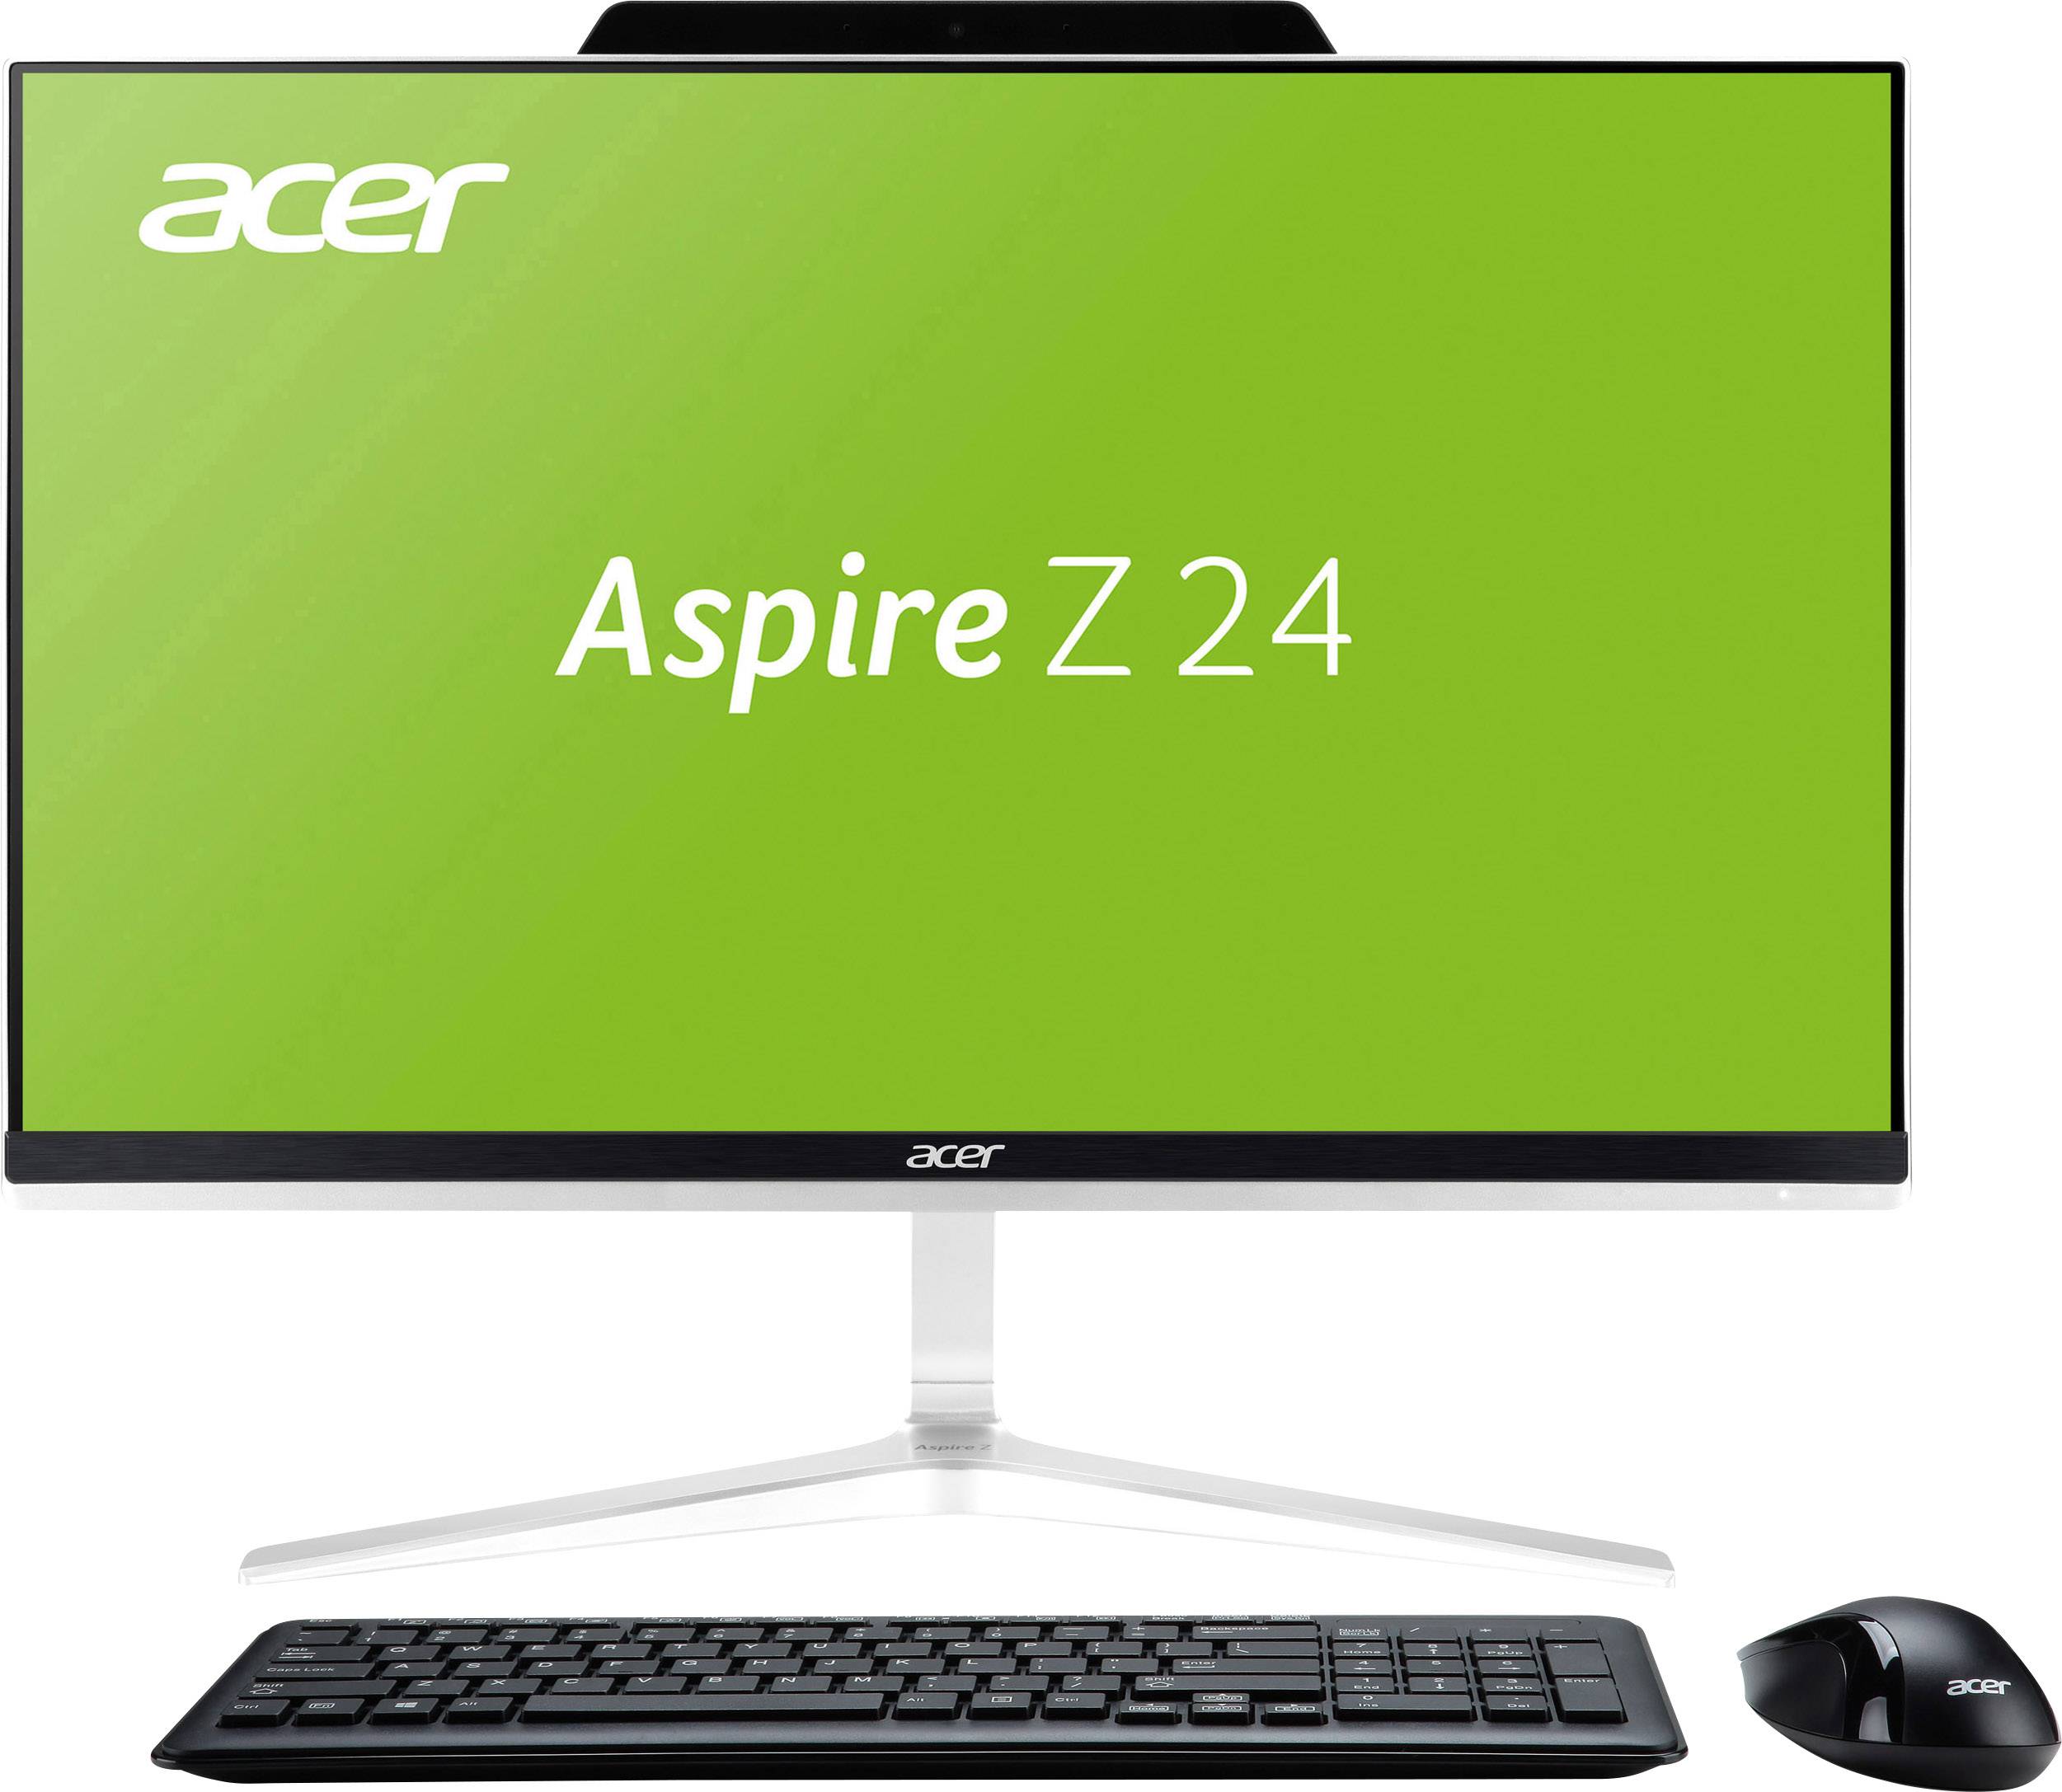 Acer Aspire zs600. Aspire z2770. Acer all1917. Acer all in one.